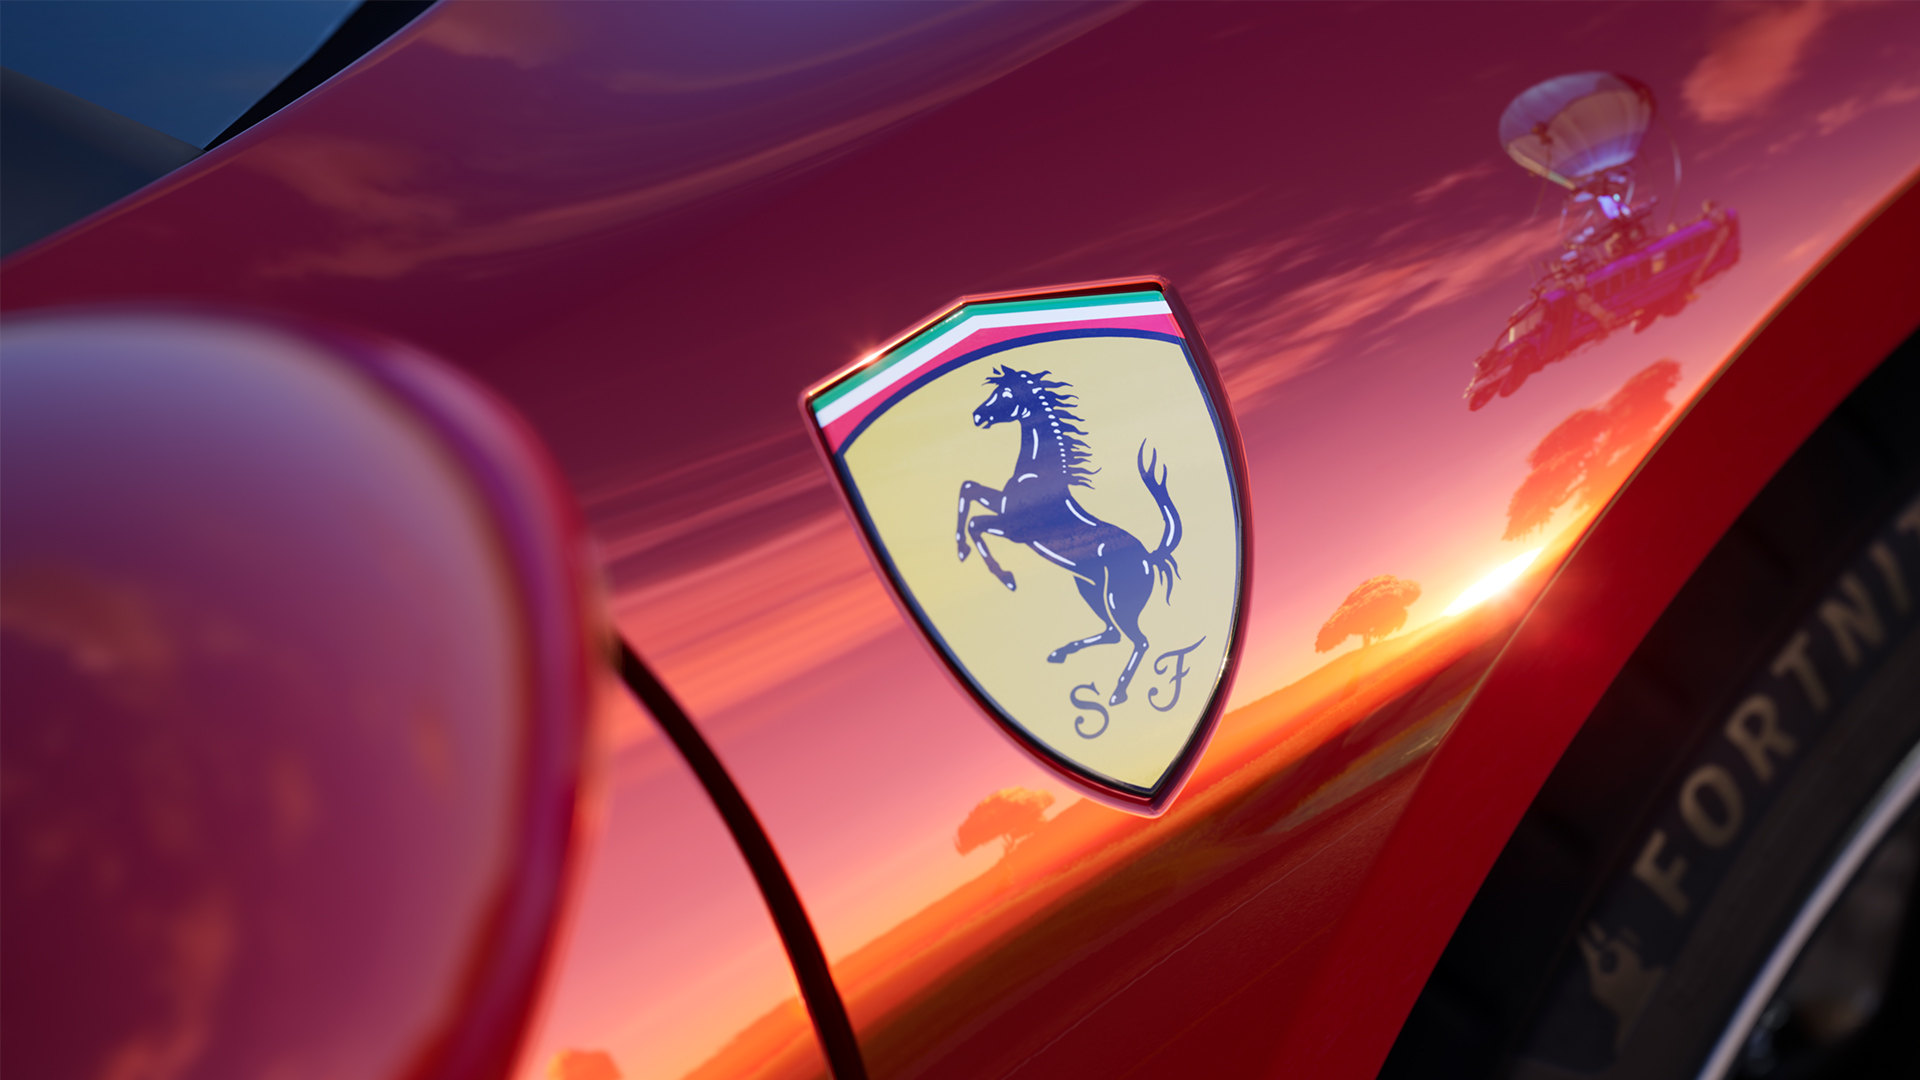 The Ferrari car logo is seen close up on a red vehicle. In the reflection of the car the Battle Bus is seen.